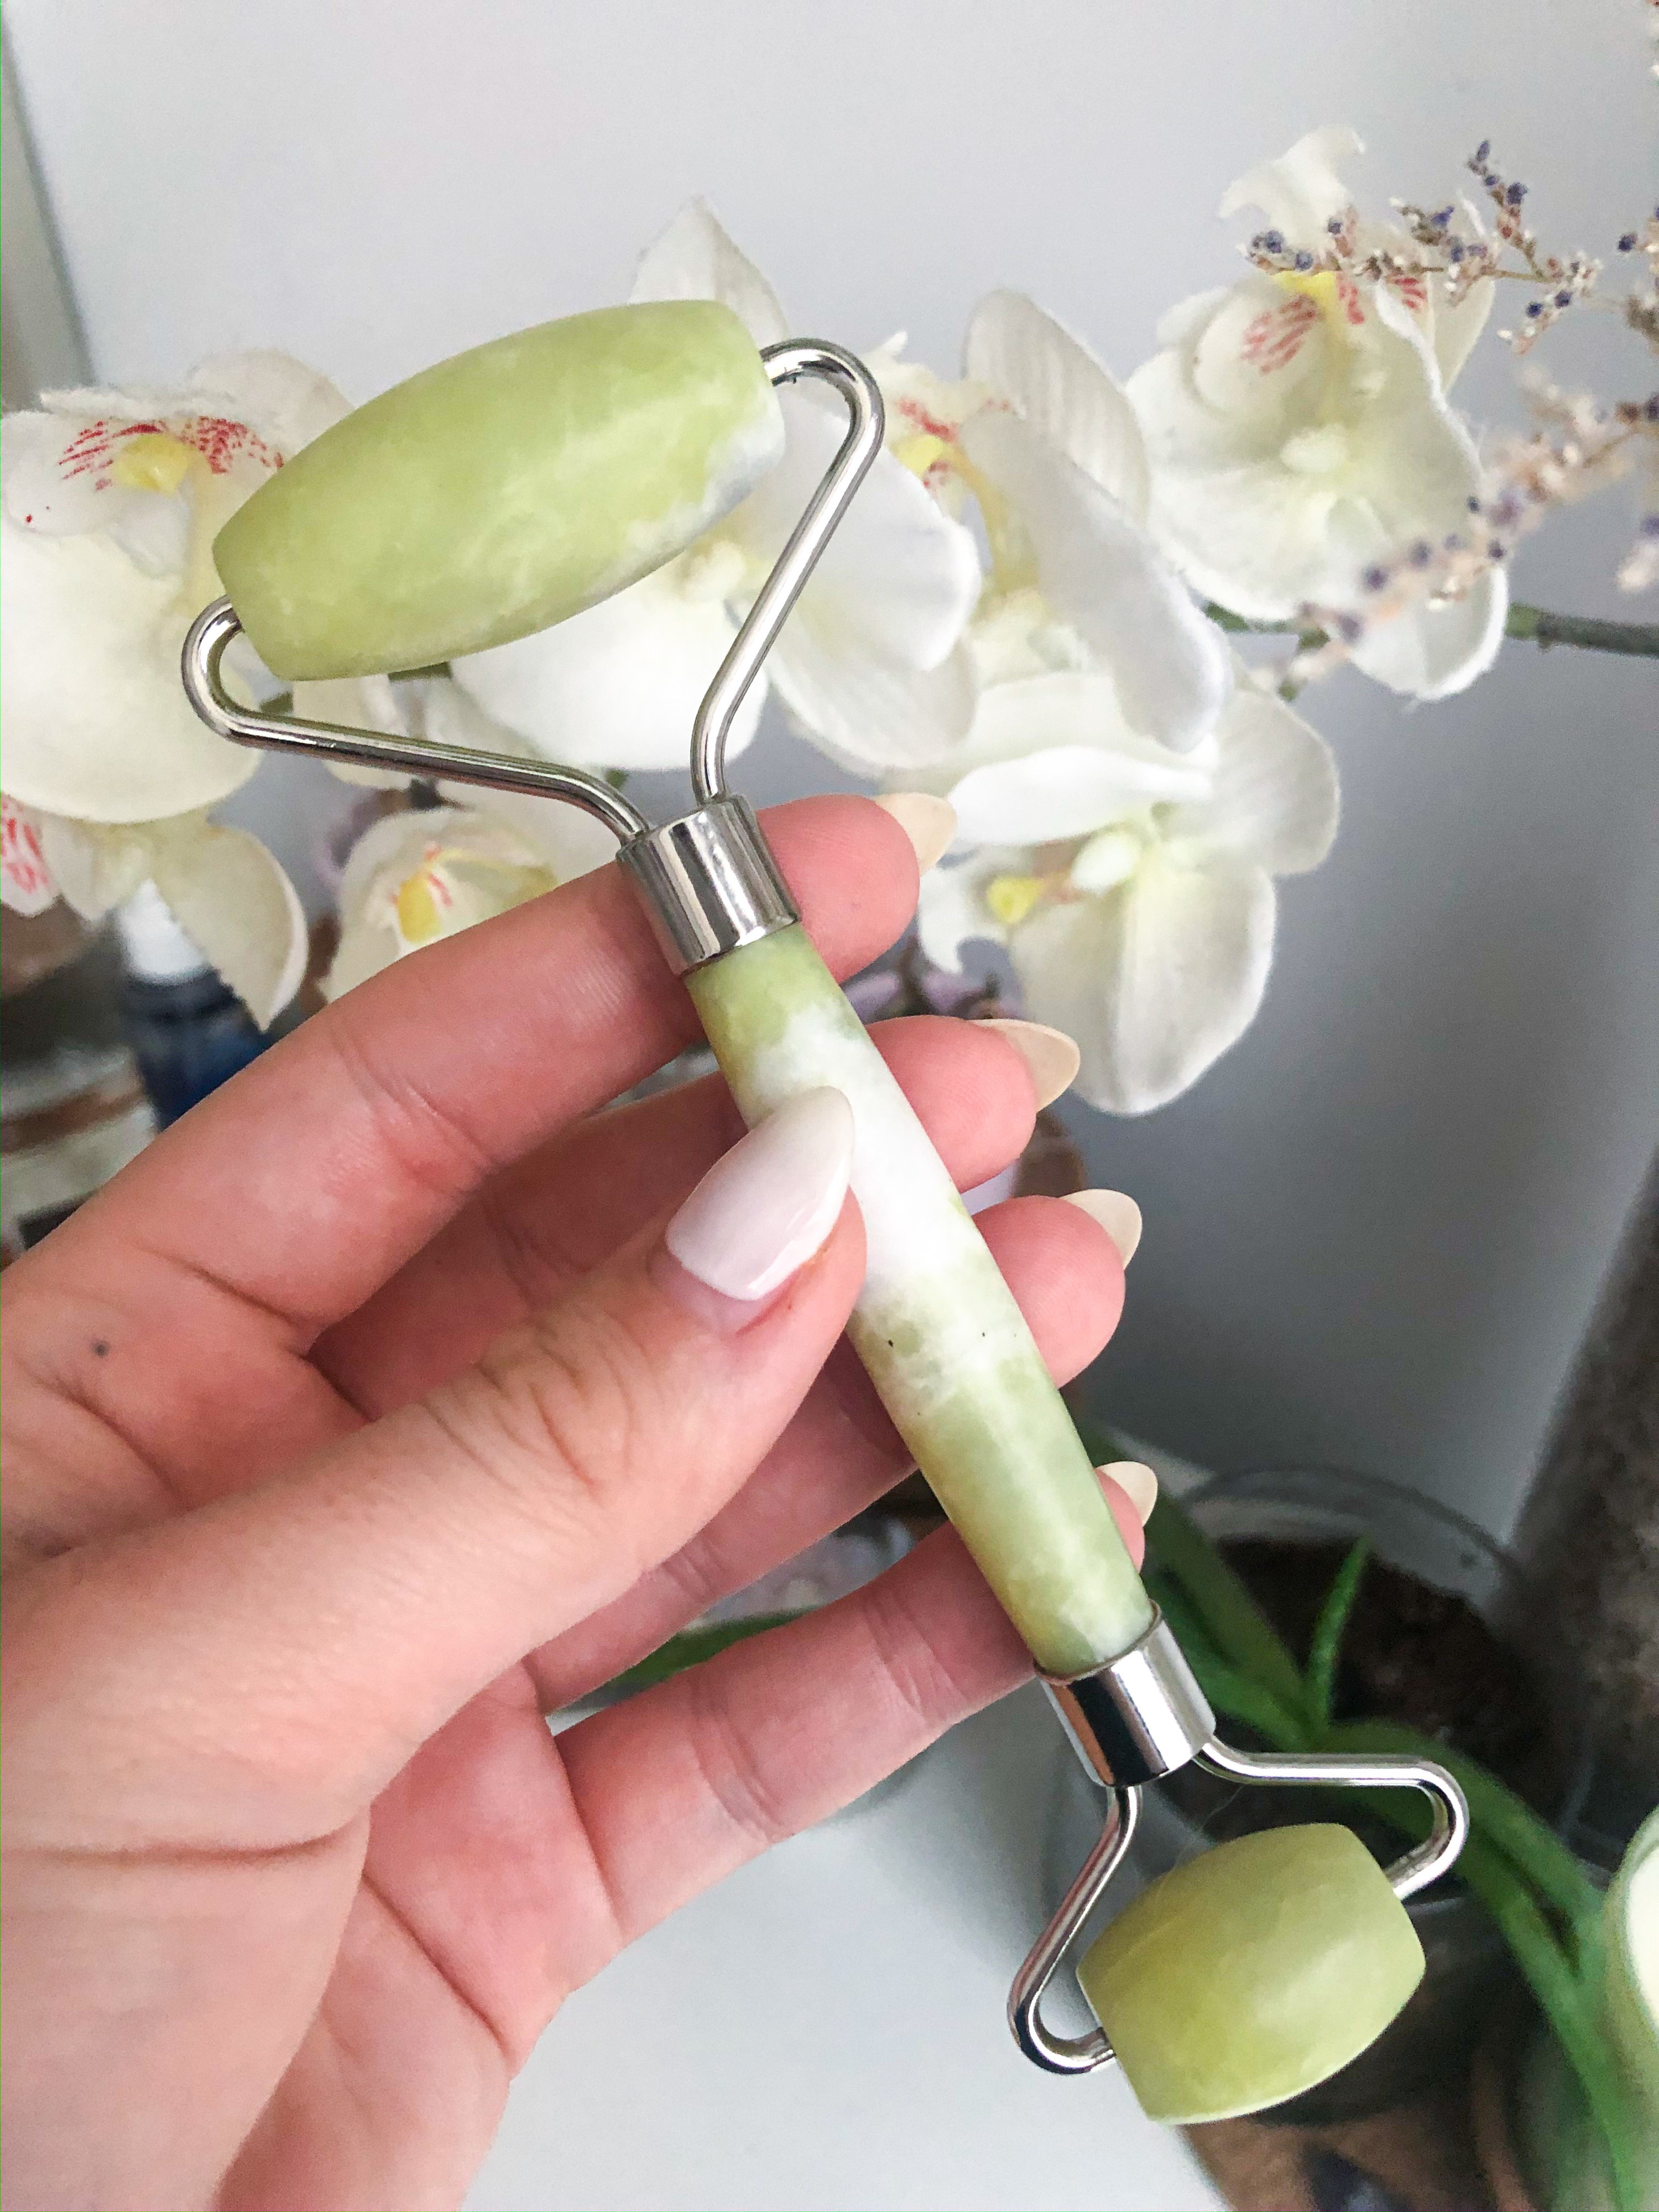 The jade roller held against a floral background